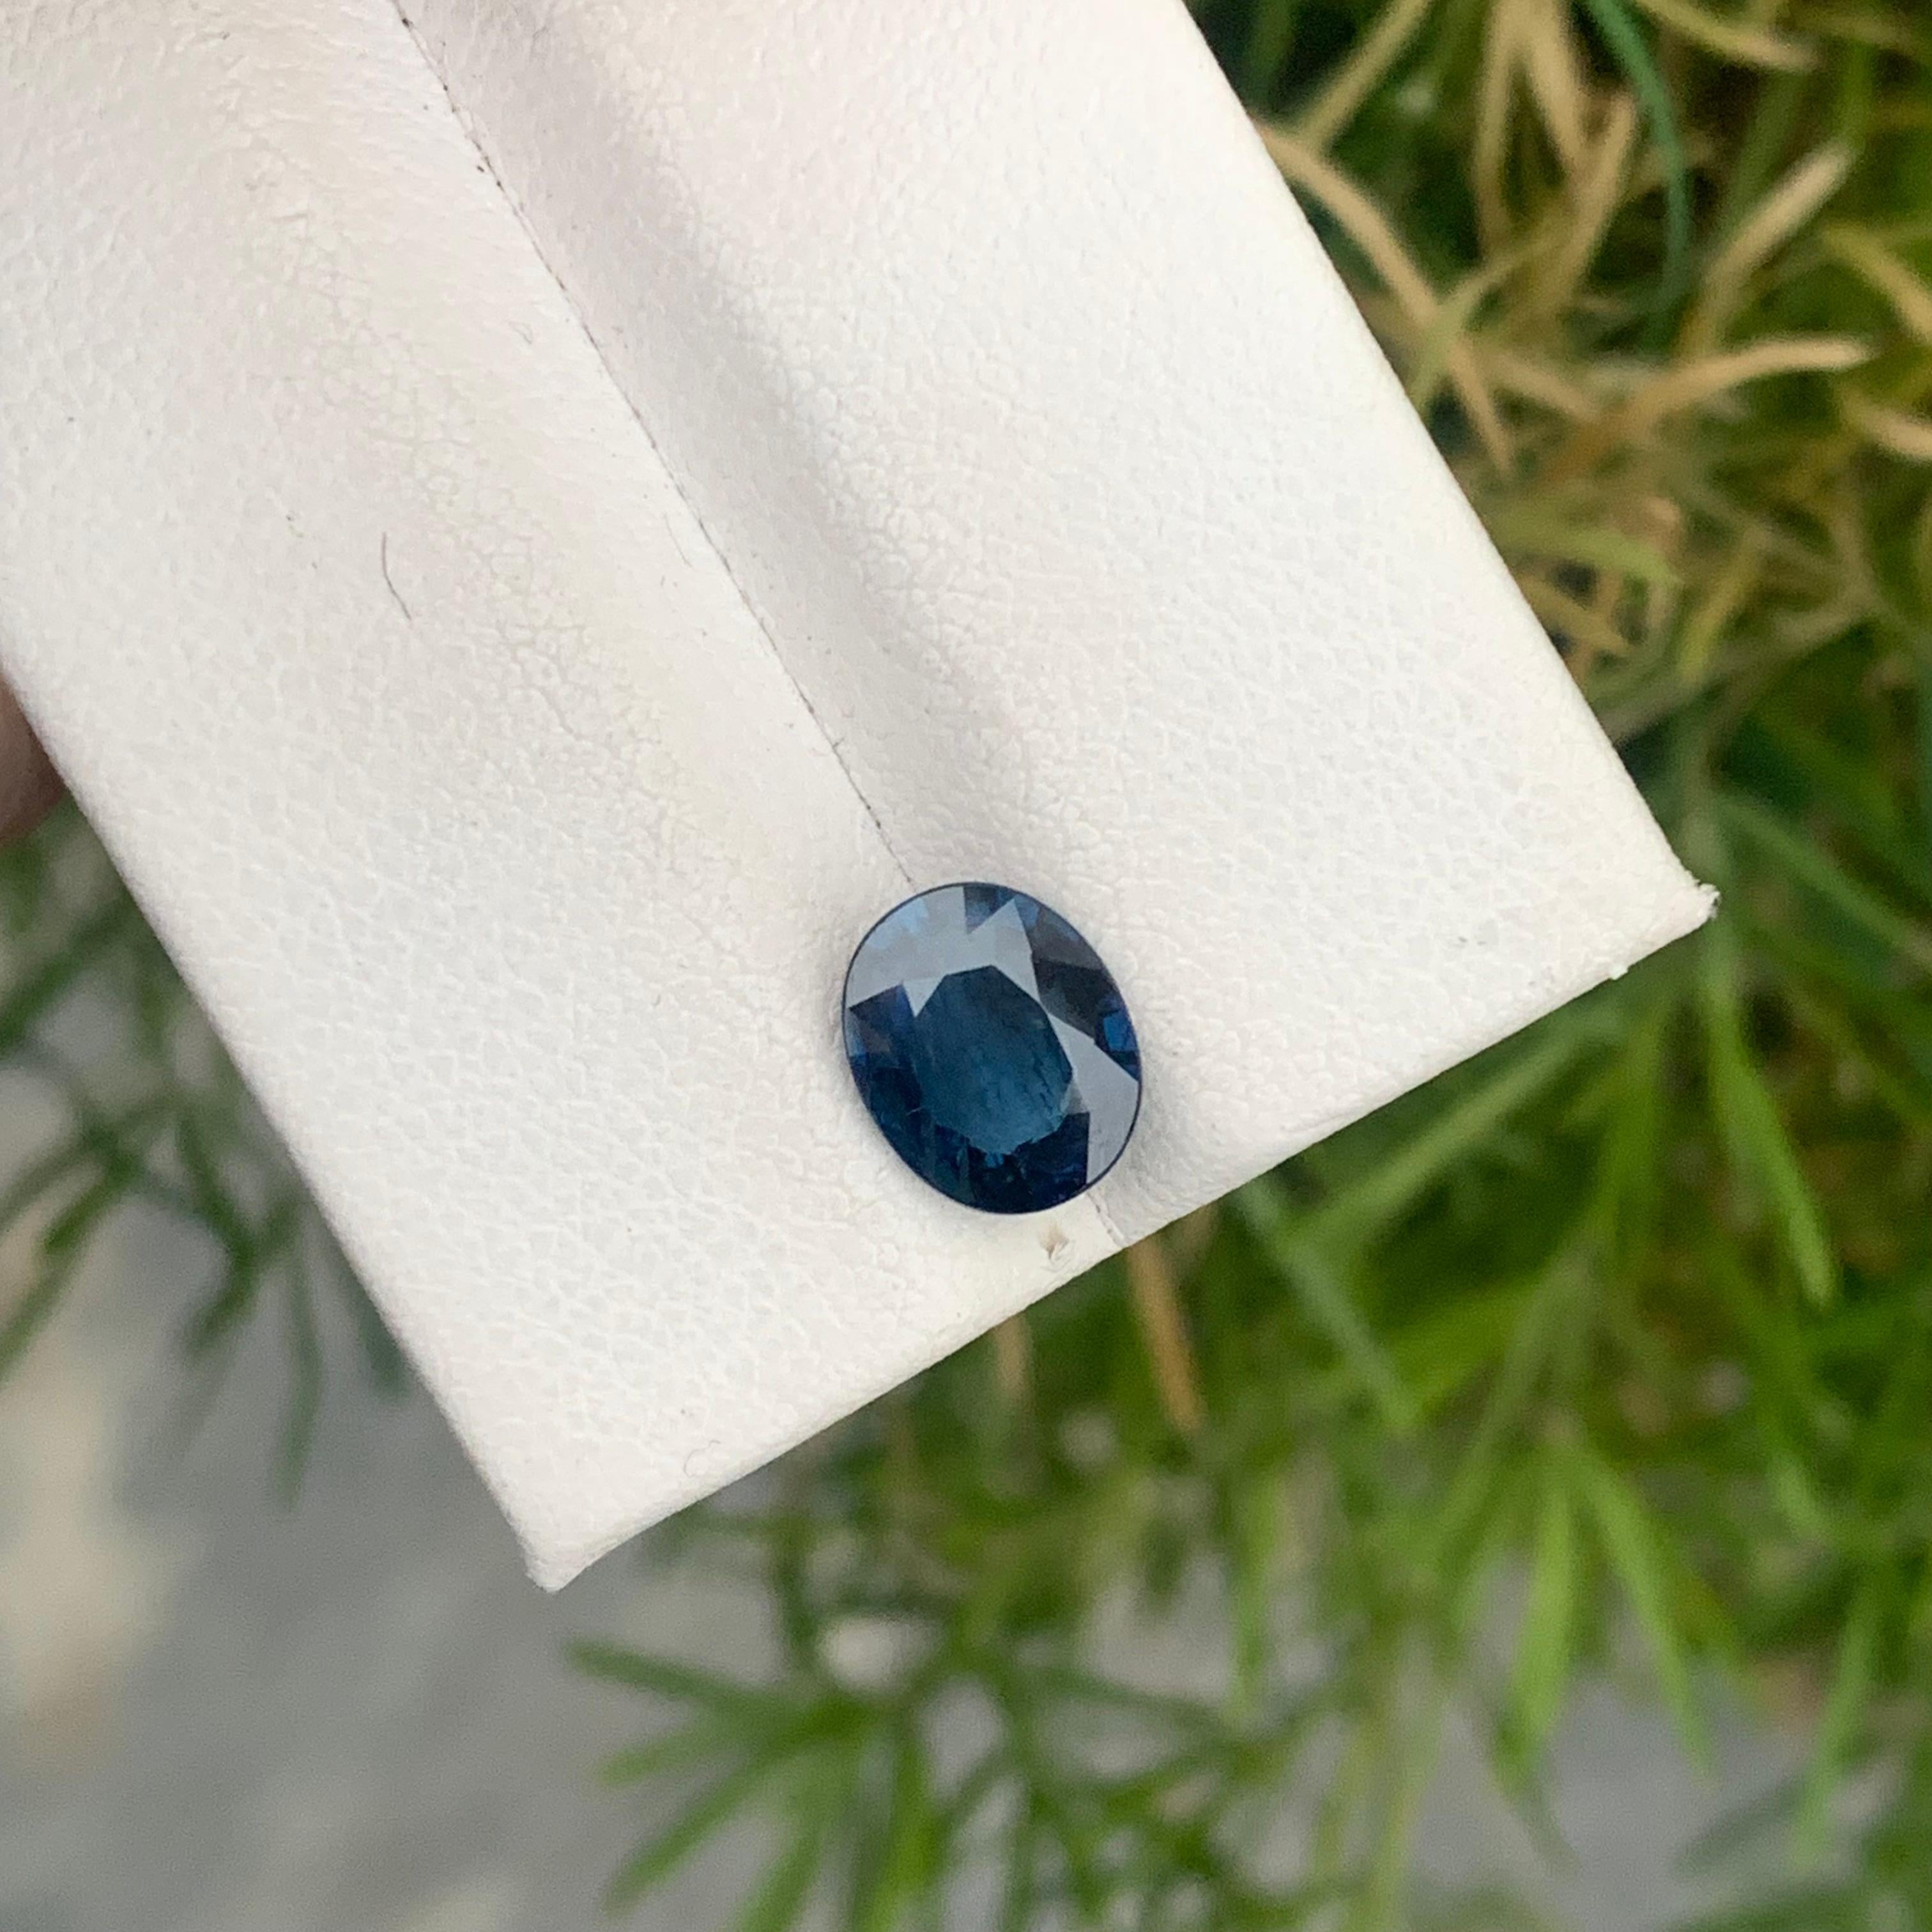 Oval Cut Gorgeous 1.58 Carat Loose Natural Blue Sapphire Gem Oval Shape for Ring Jewelry For Sale